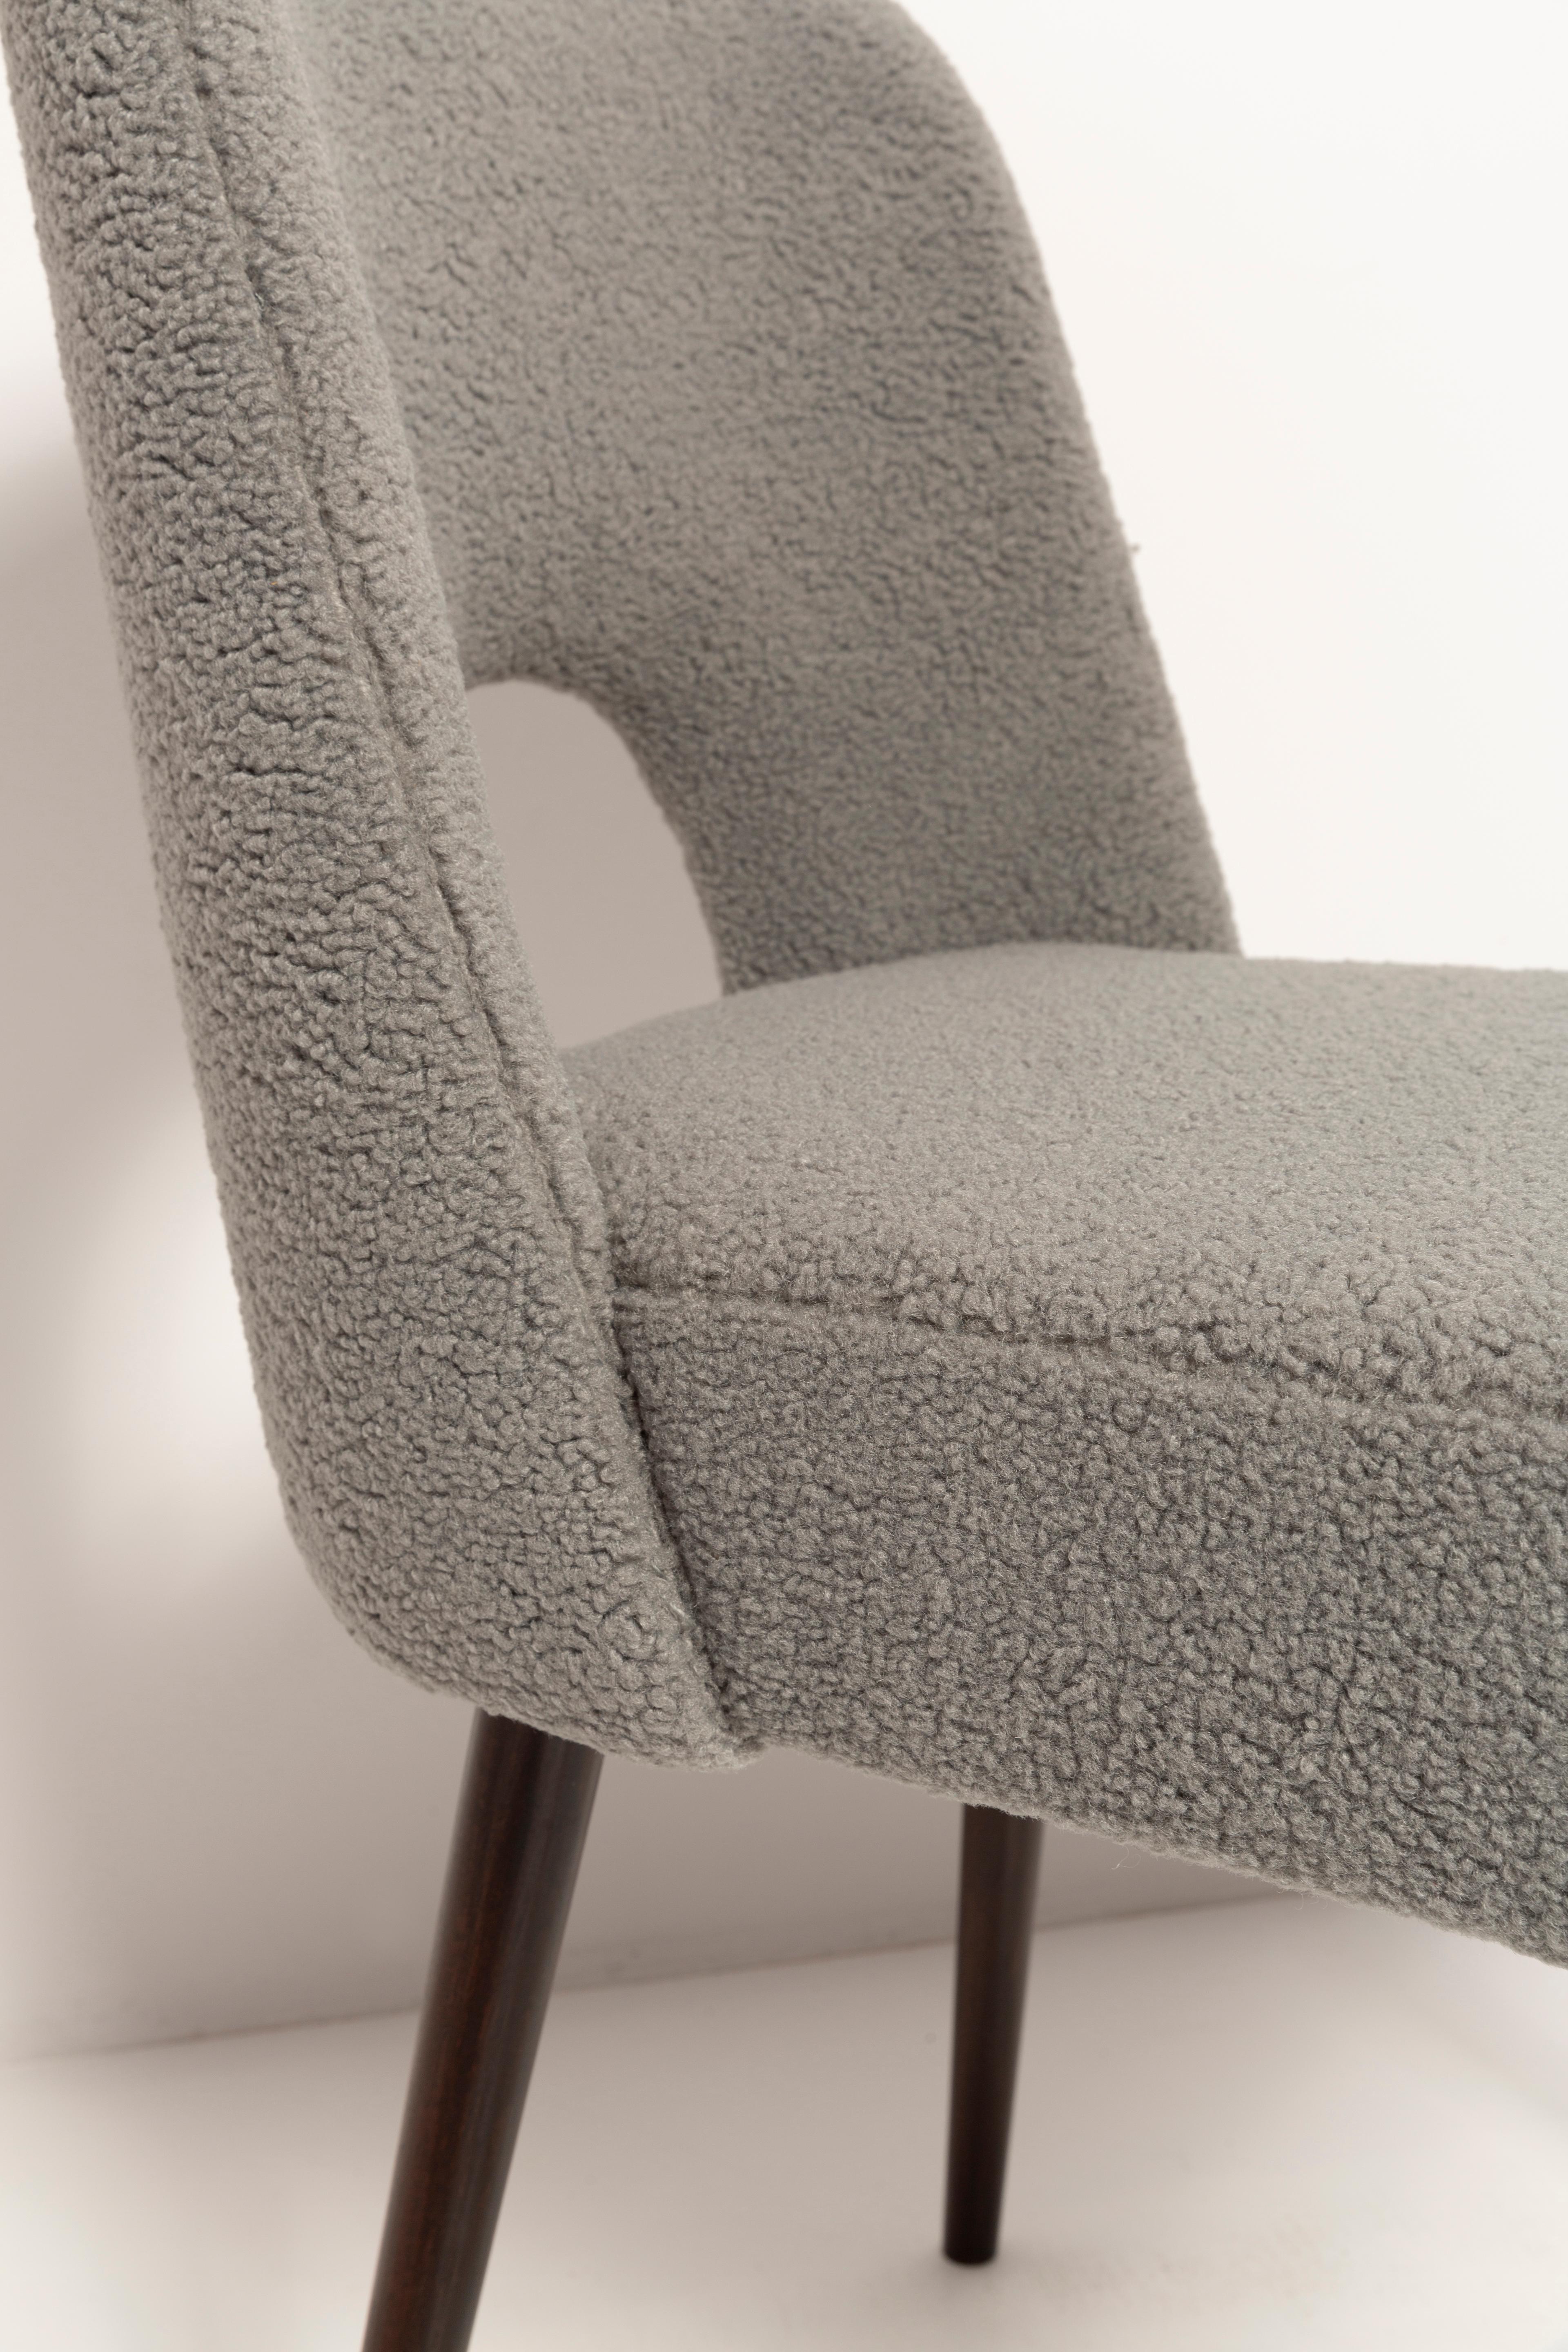 Hand-Crafted Set of Four Gray Boucle 'Shell' Chairs, Europe, 1960s For Sale